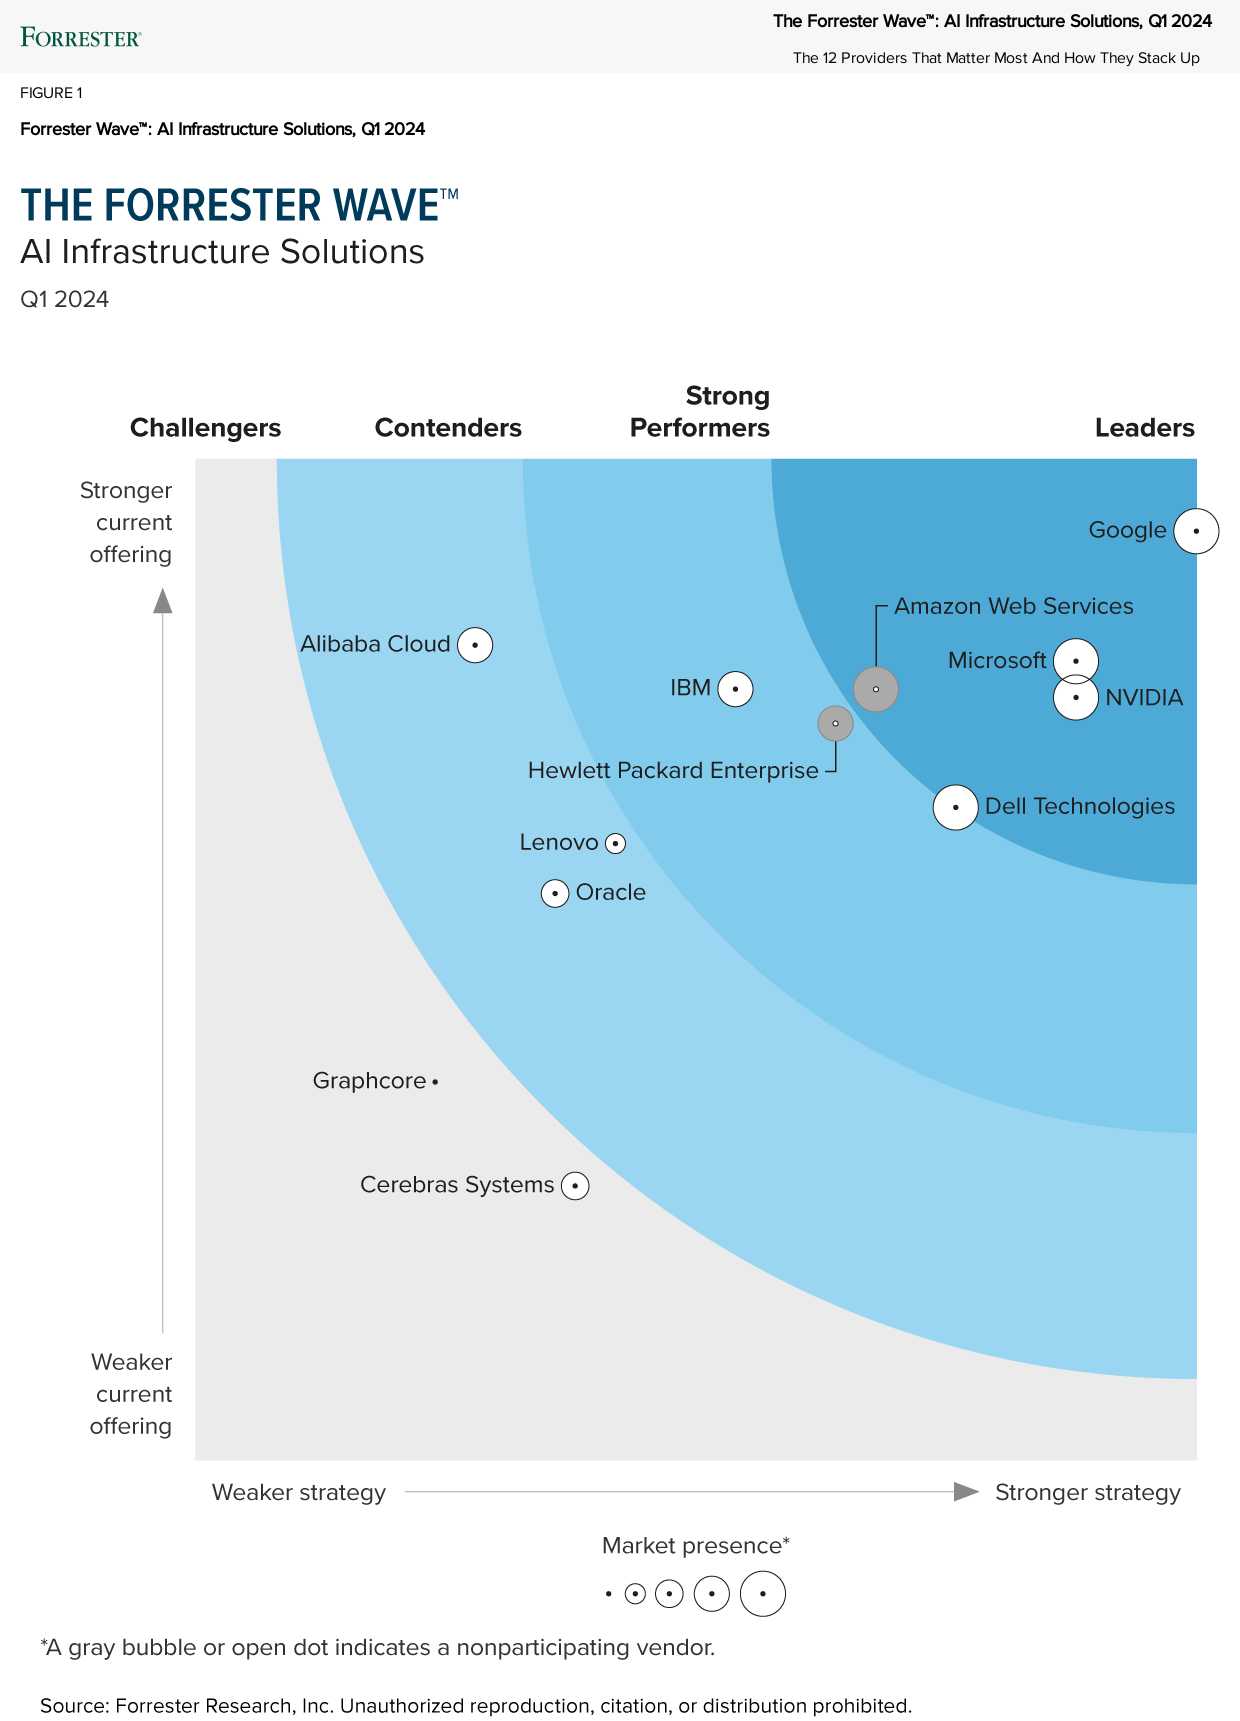 The Forrester Wave bar graph showing top contenders providing infrastructure solutions